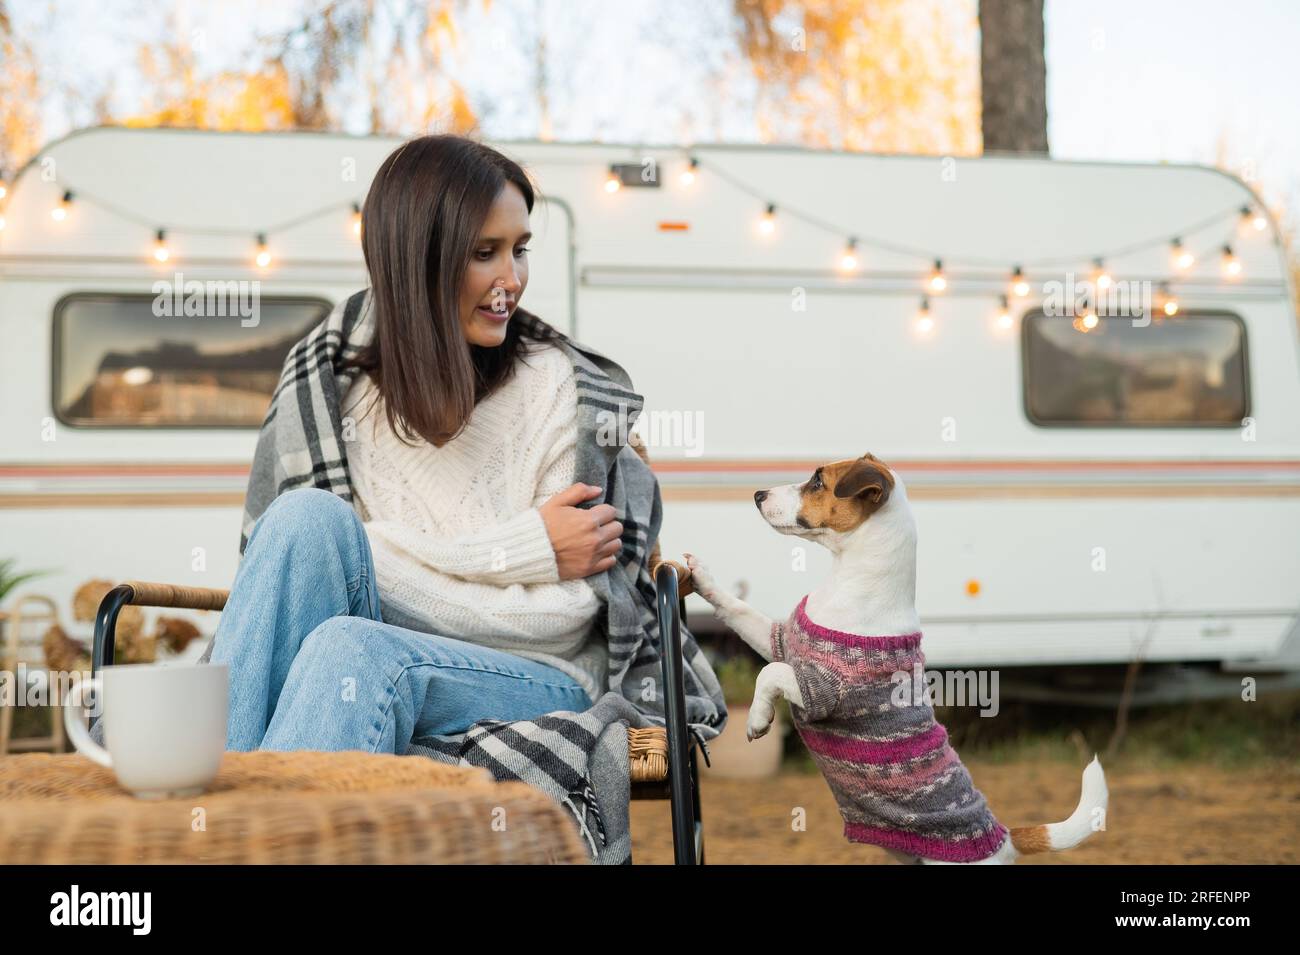 Caucasian woman sitting in a wicker chair wrapped in a blanket with a dog in the yard near the trailer in autumn.  Stock Photo